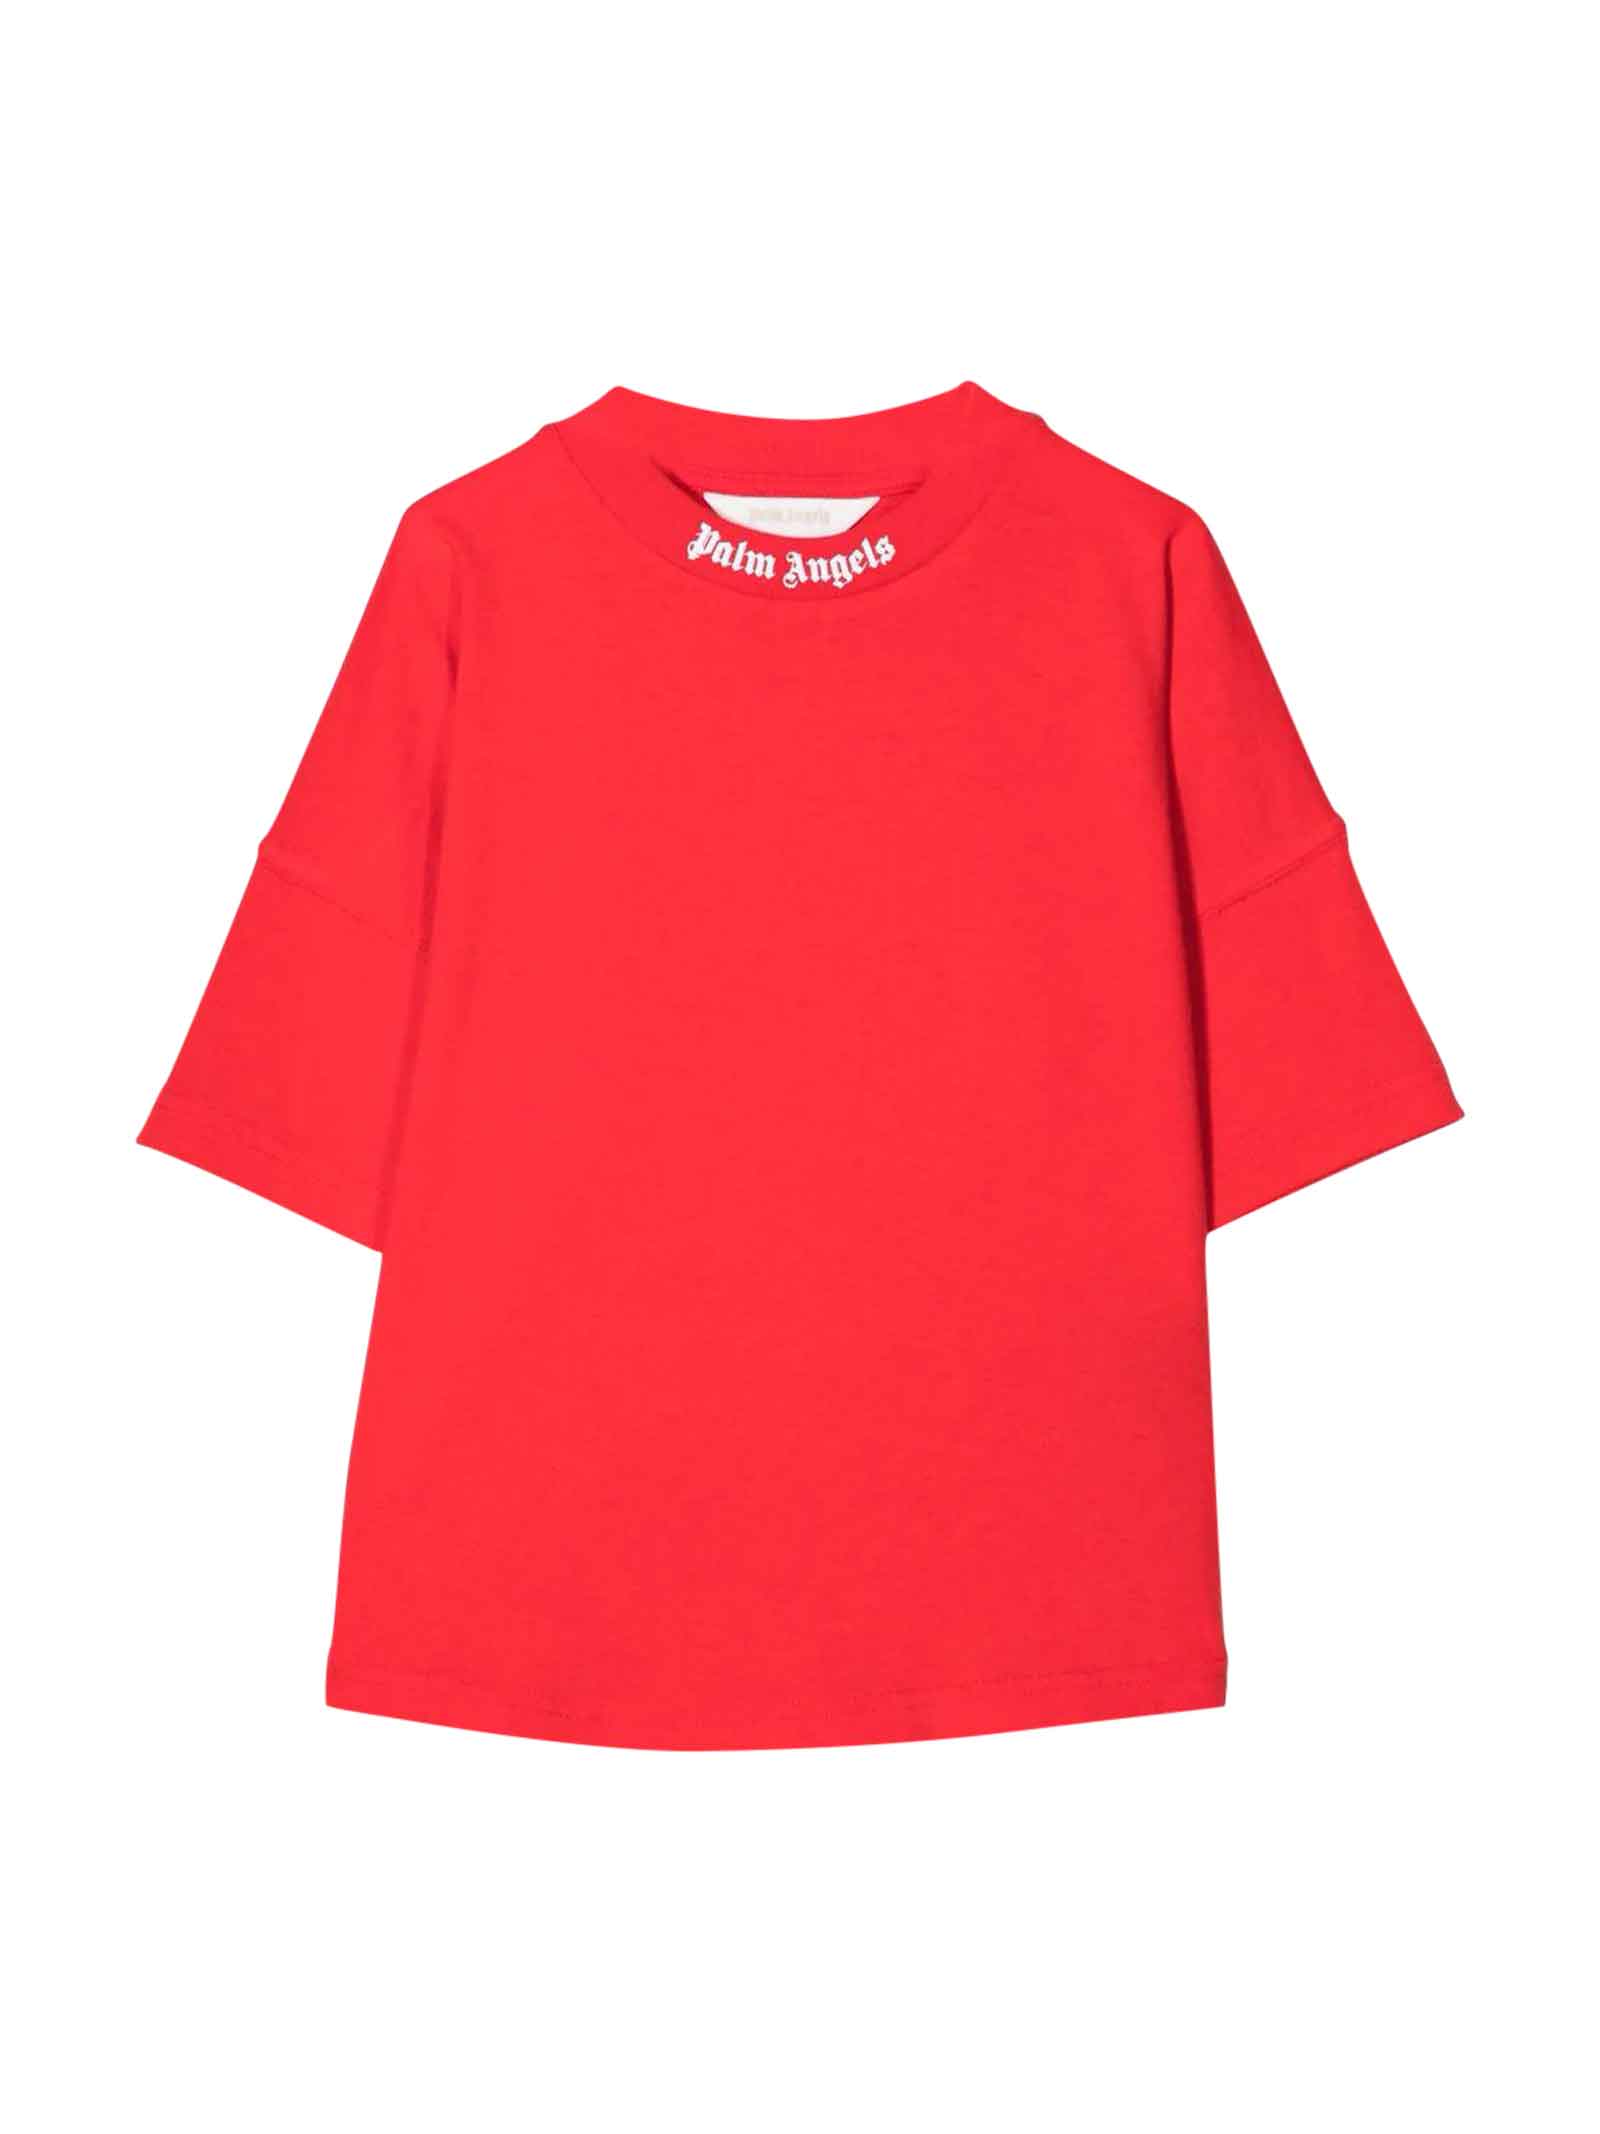 Palm Angels Red T-shirt With White Print